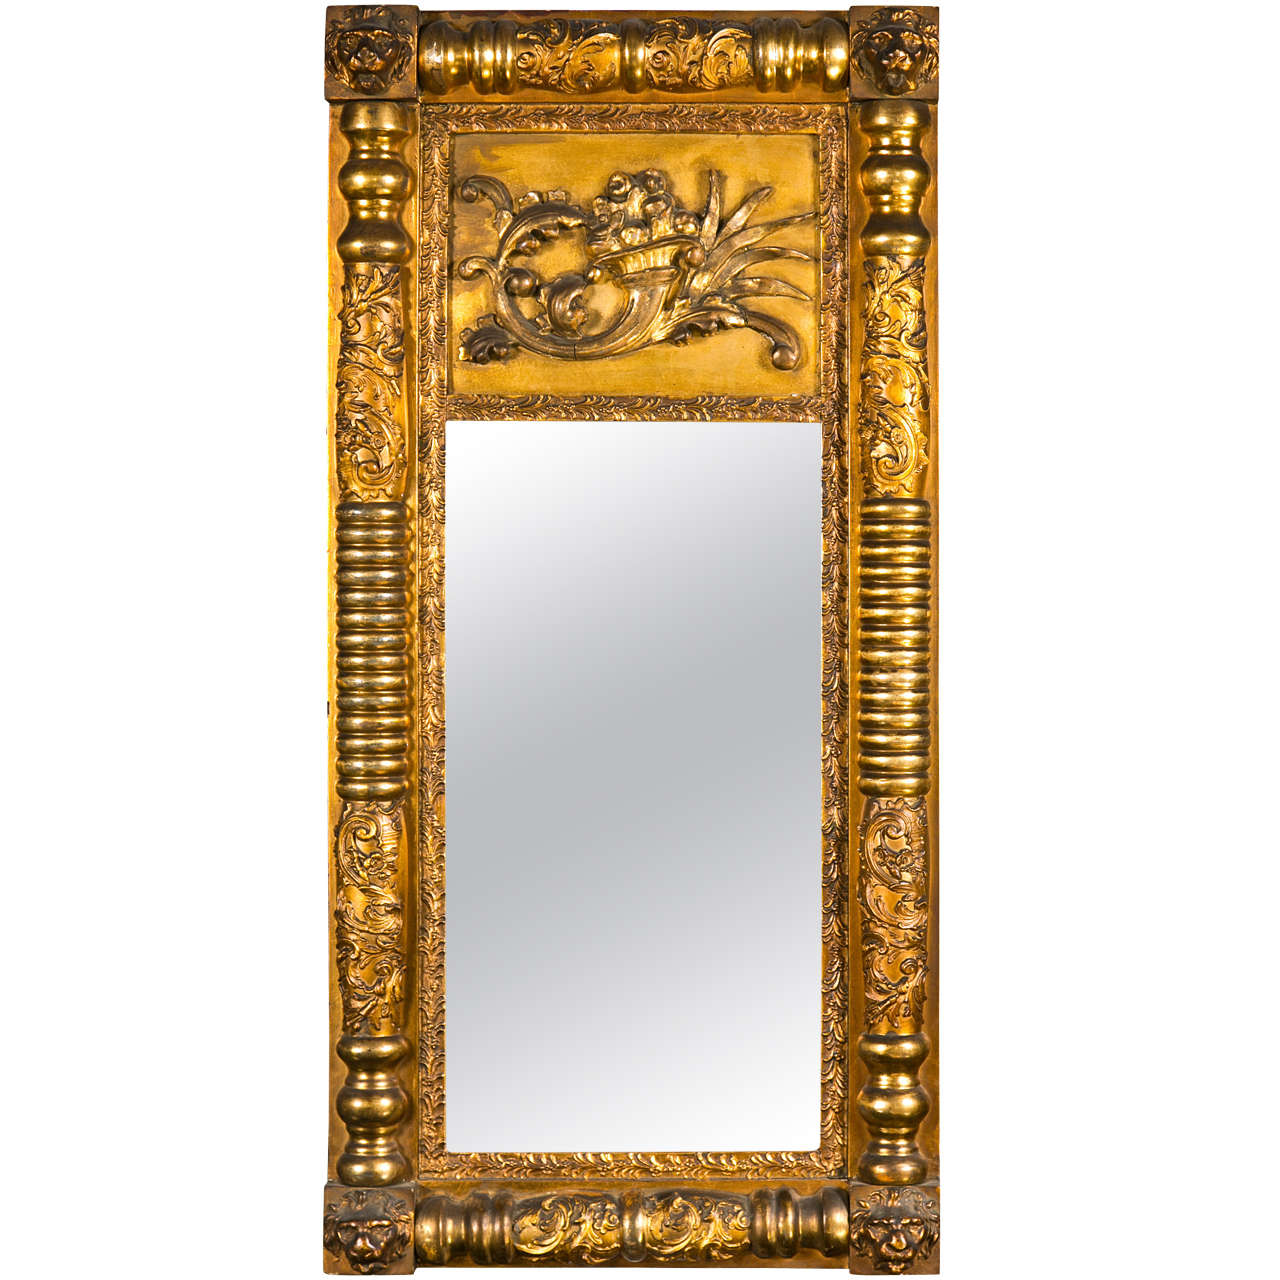 French Empire Style Giltwood Mirror Elaborately Carved Frame Circa 19th Century For Sale